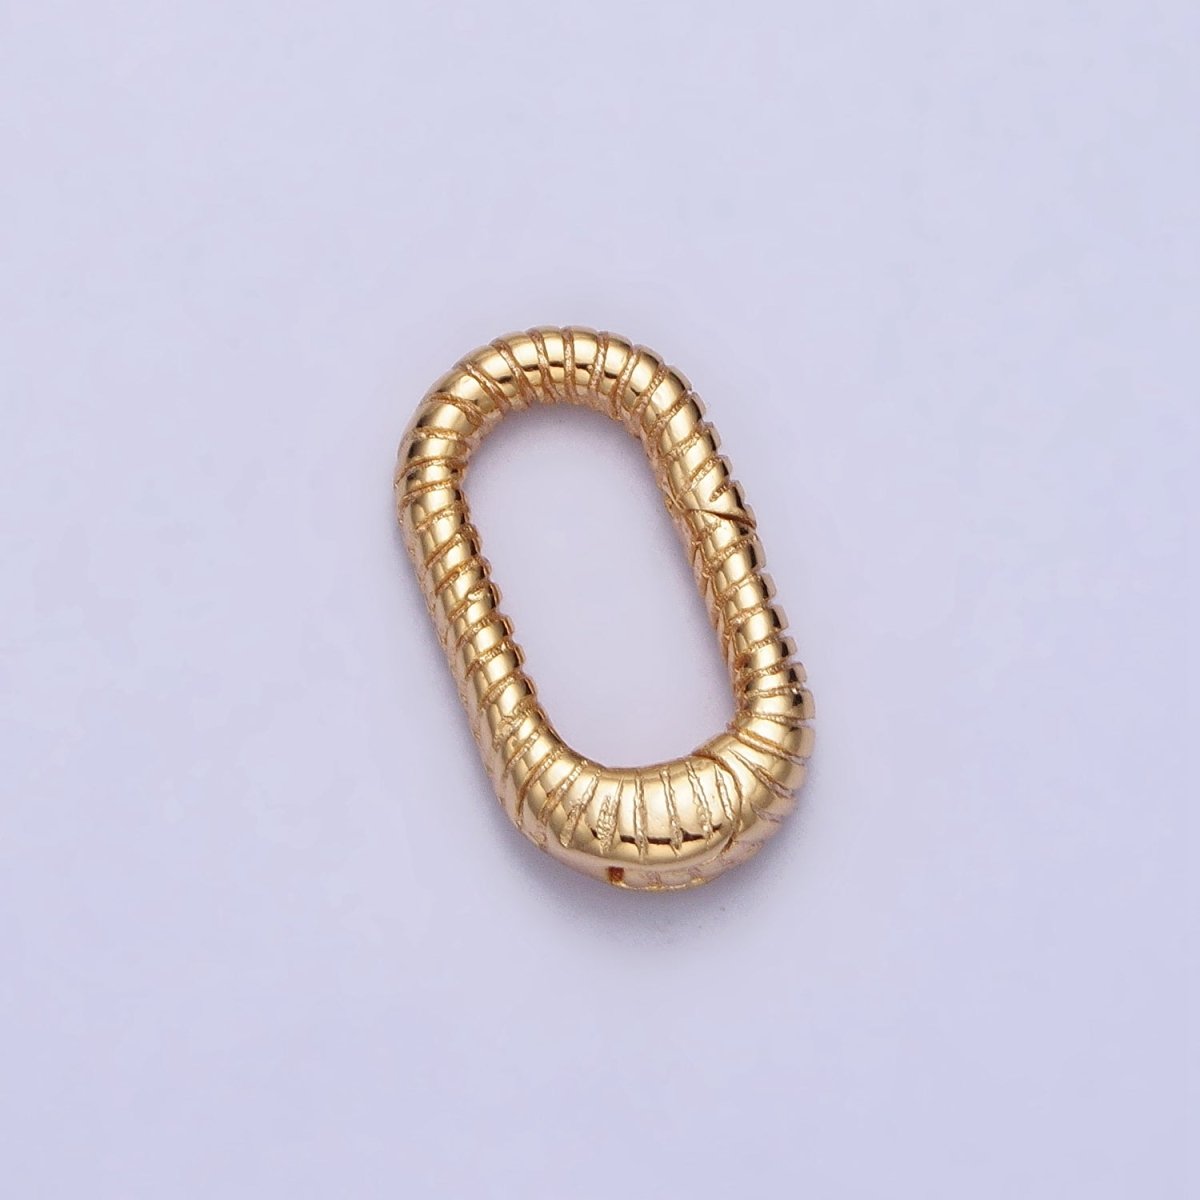 16mm Gold Textured Striped Oblong Push Spring Gate Ring Closure Enhancer Supply | Z-069 - DLUXCA